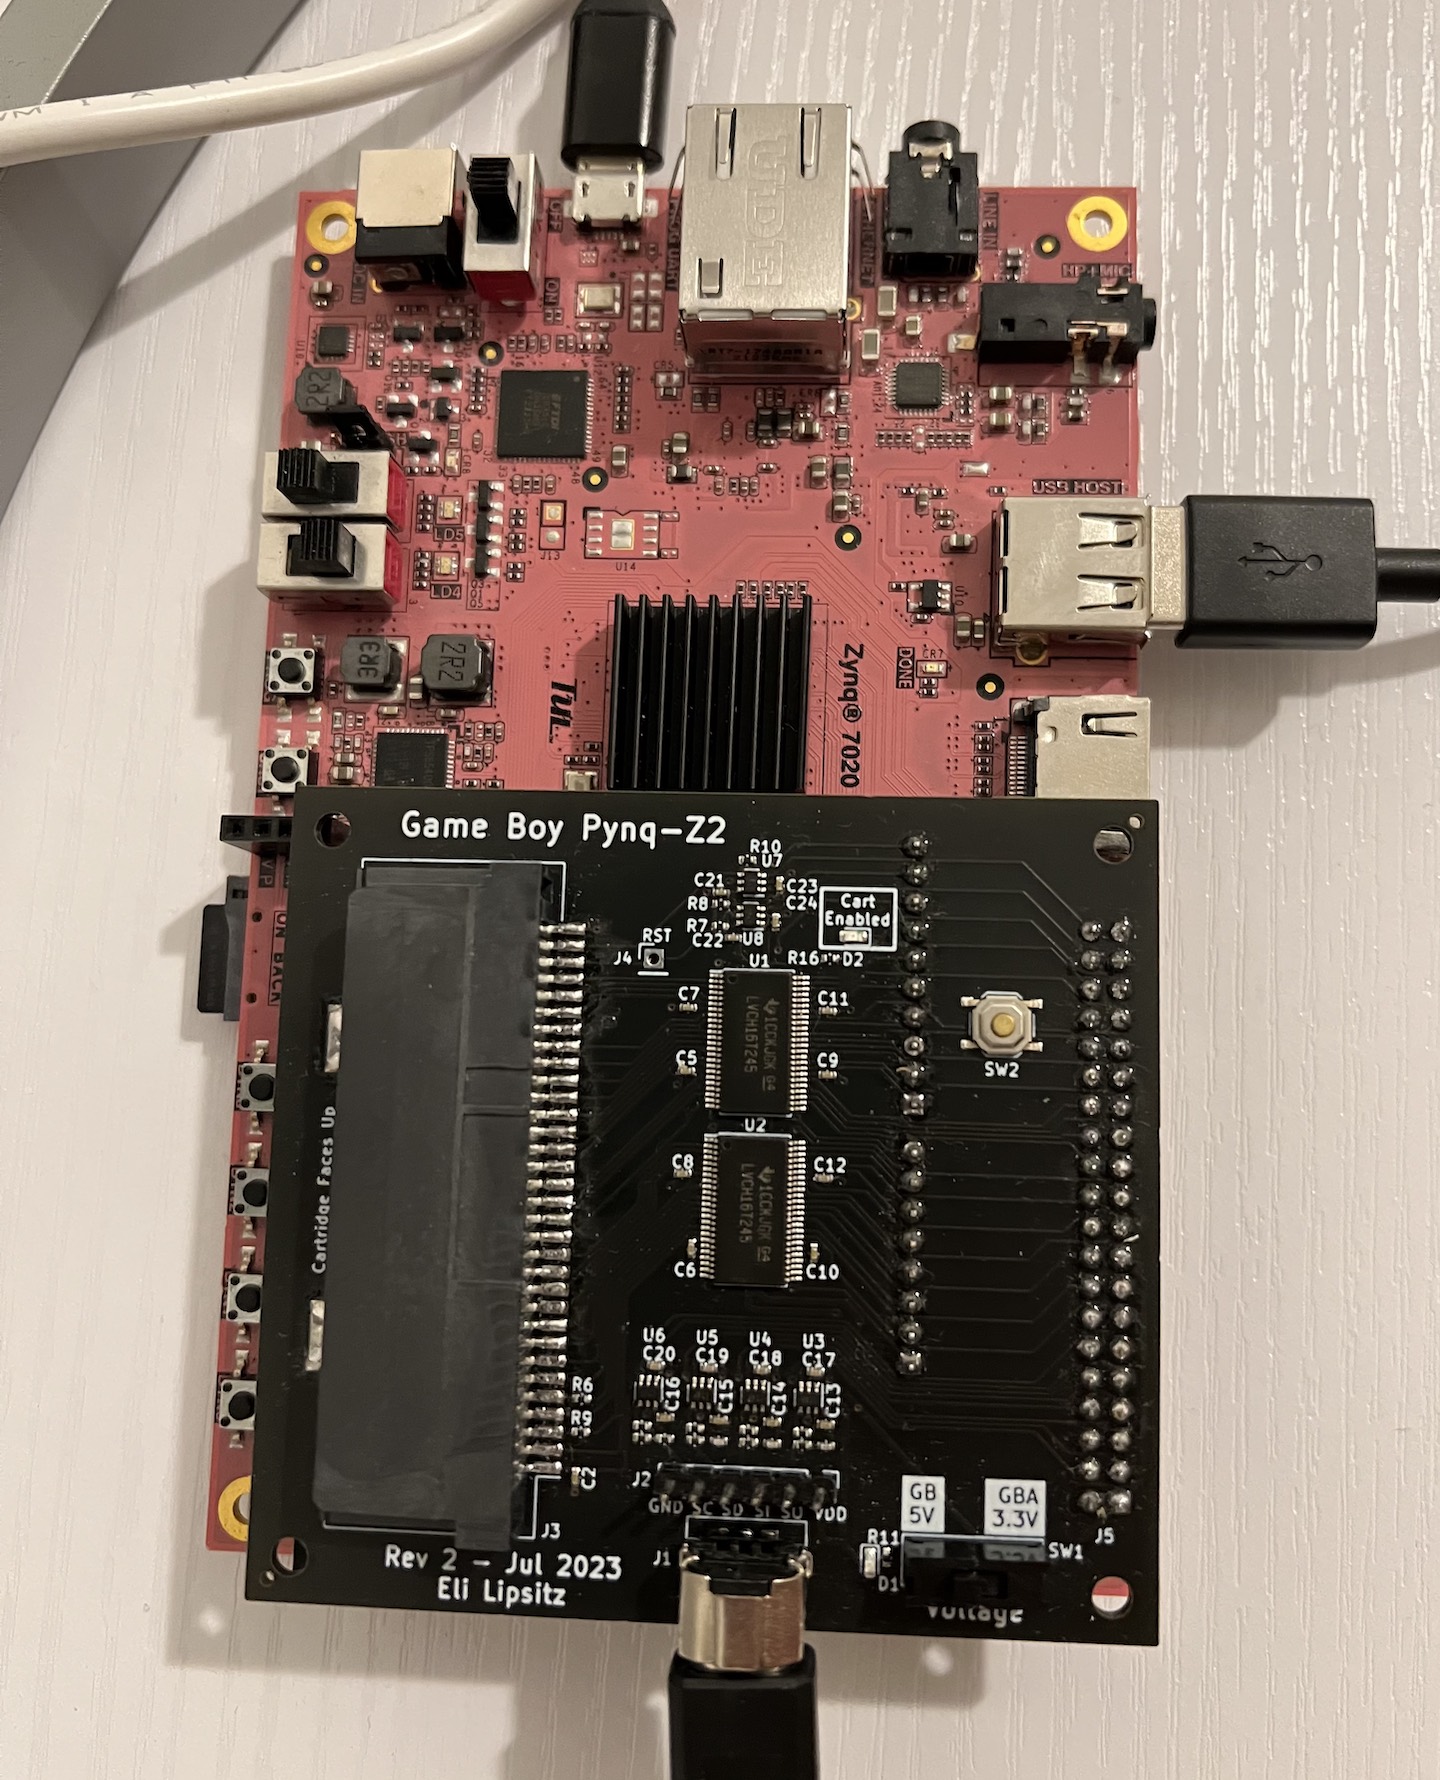 Assembled FPGA board with cartridge adapter